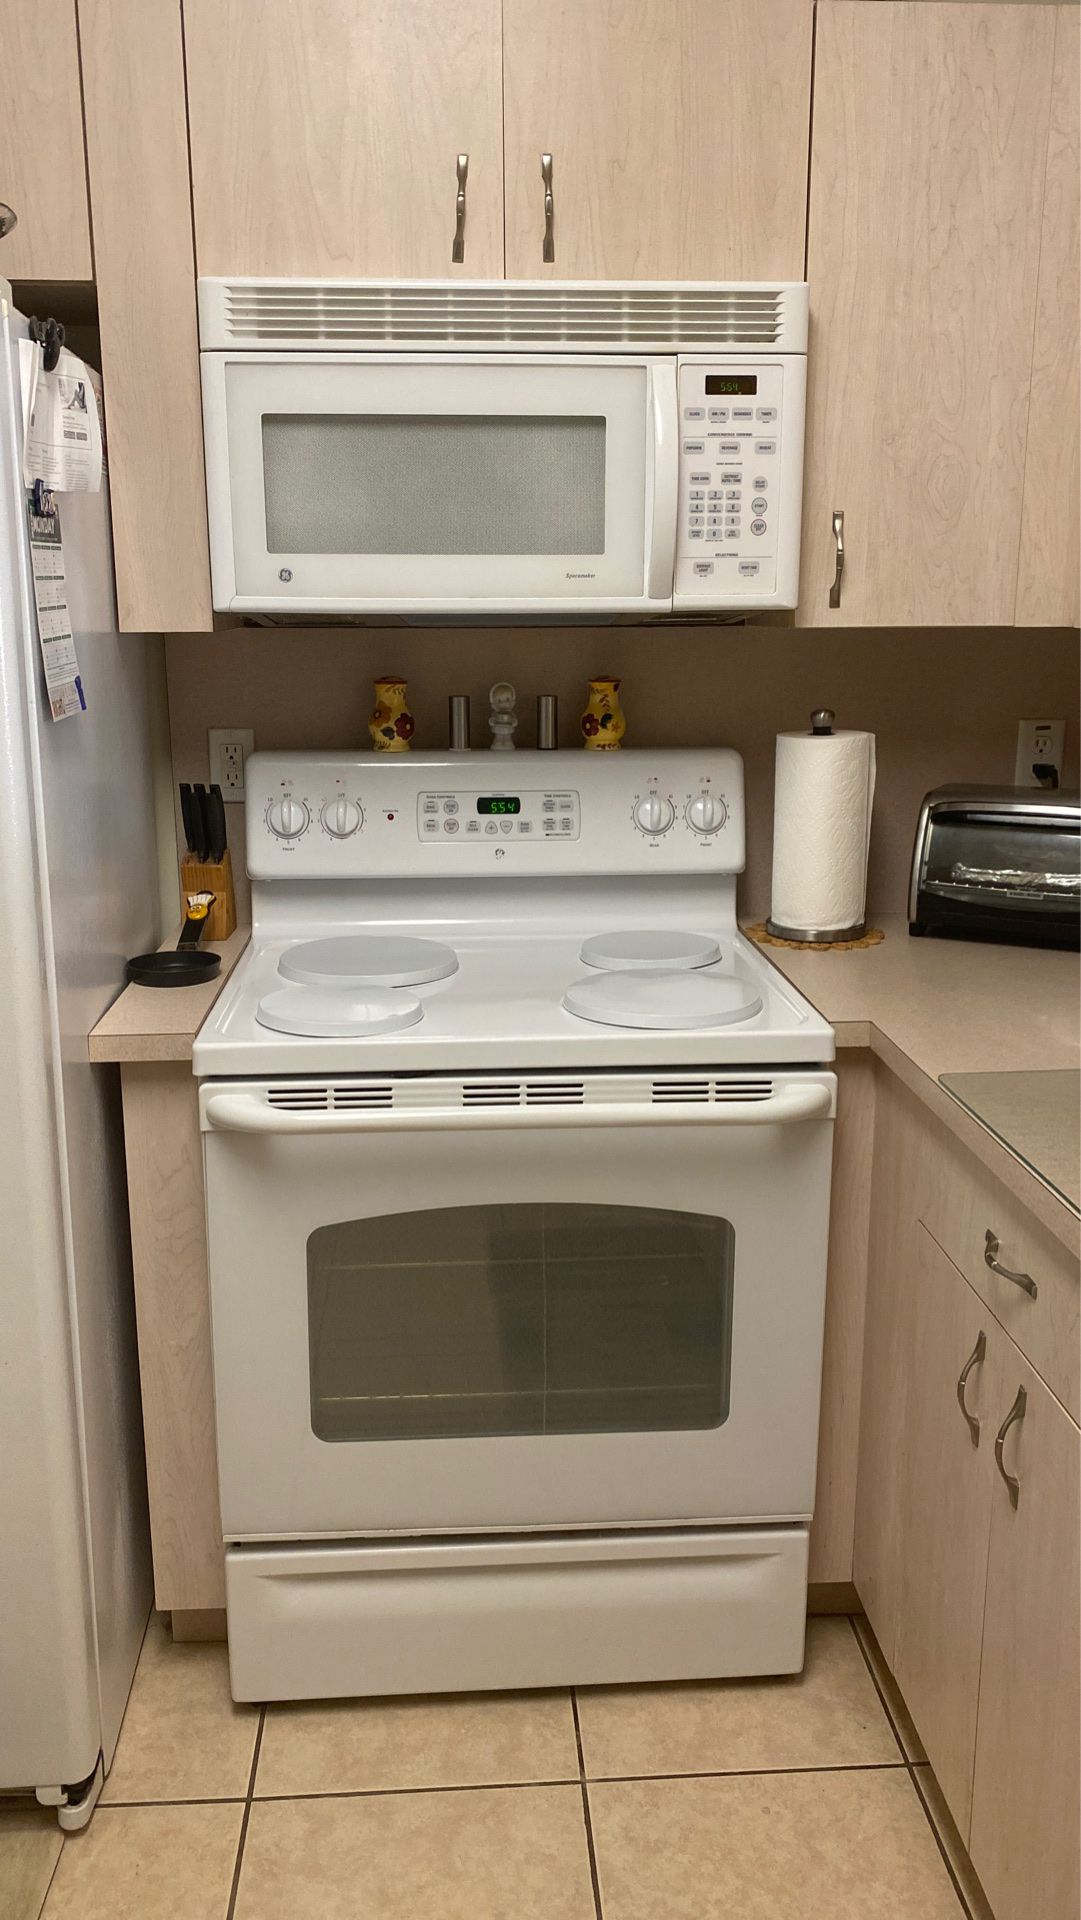 GE KITCHEN APPLIANCES STOVE AND MICROWAVE